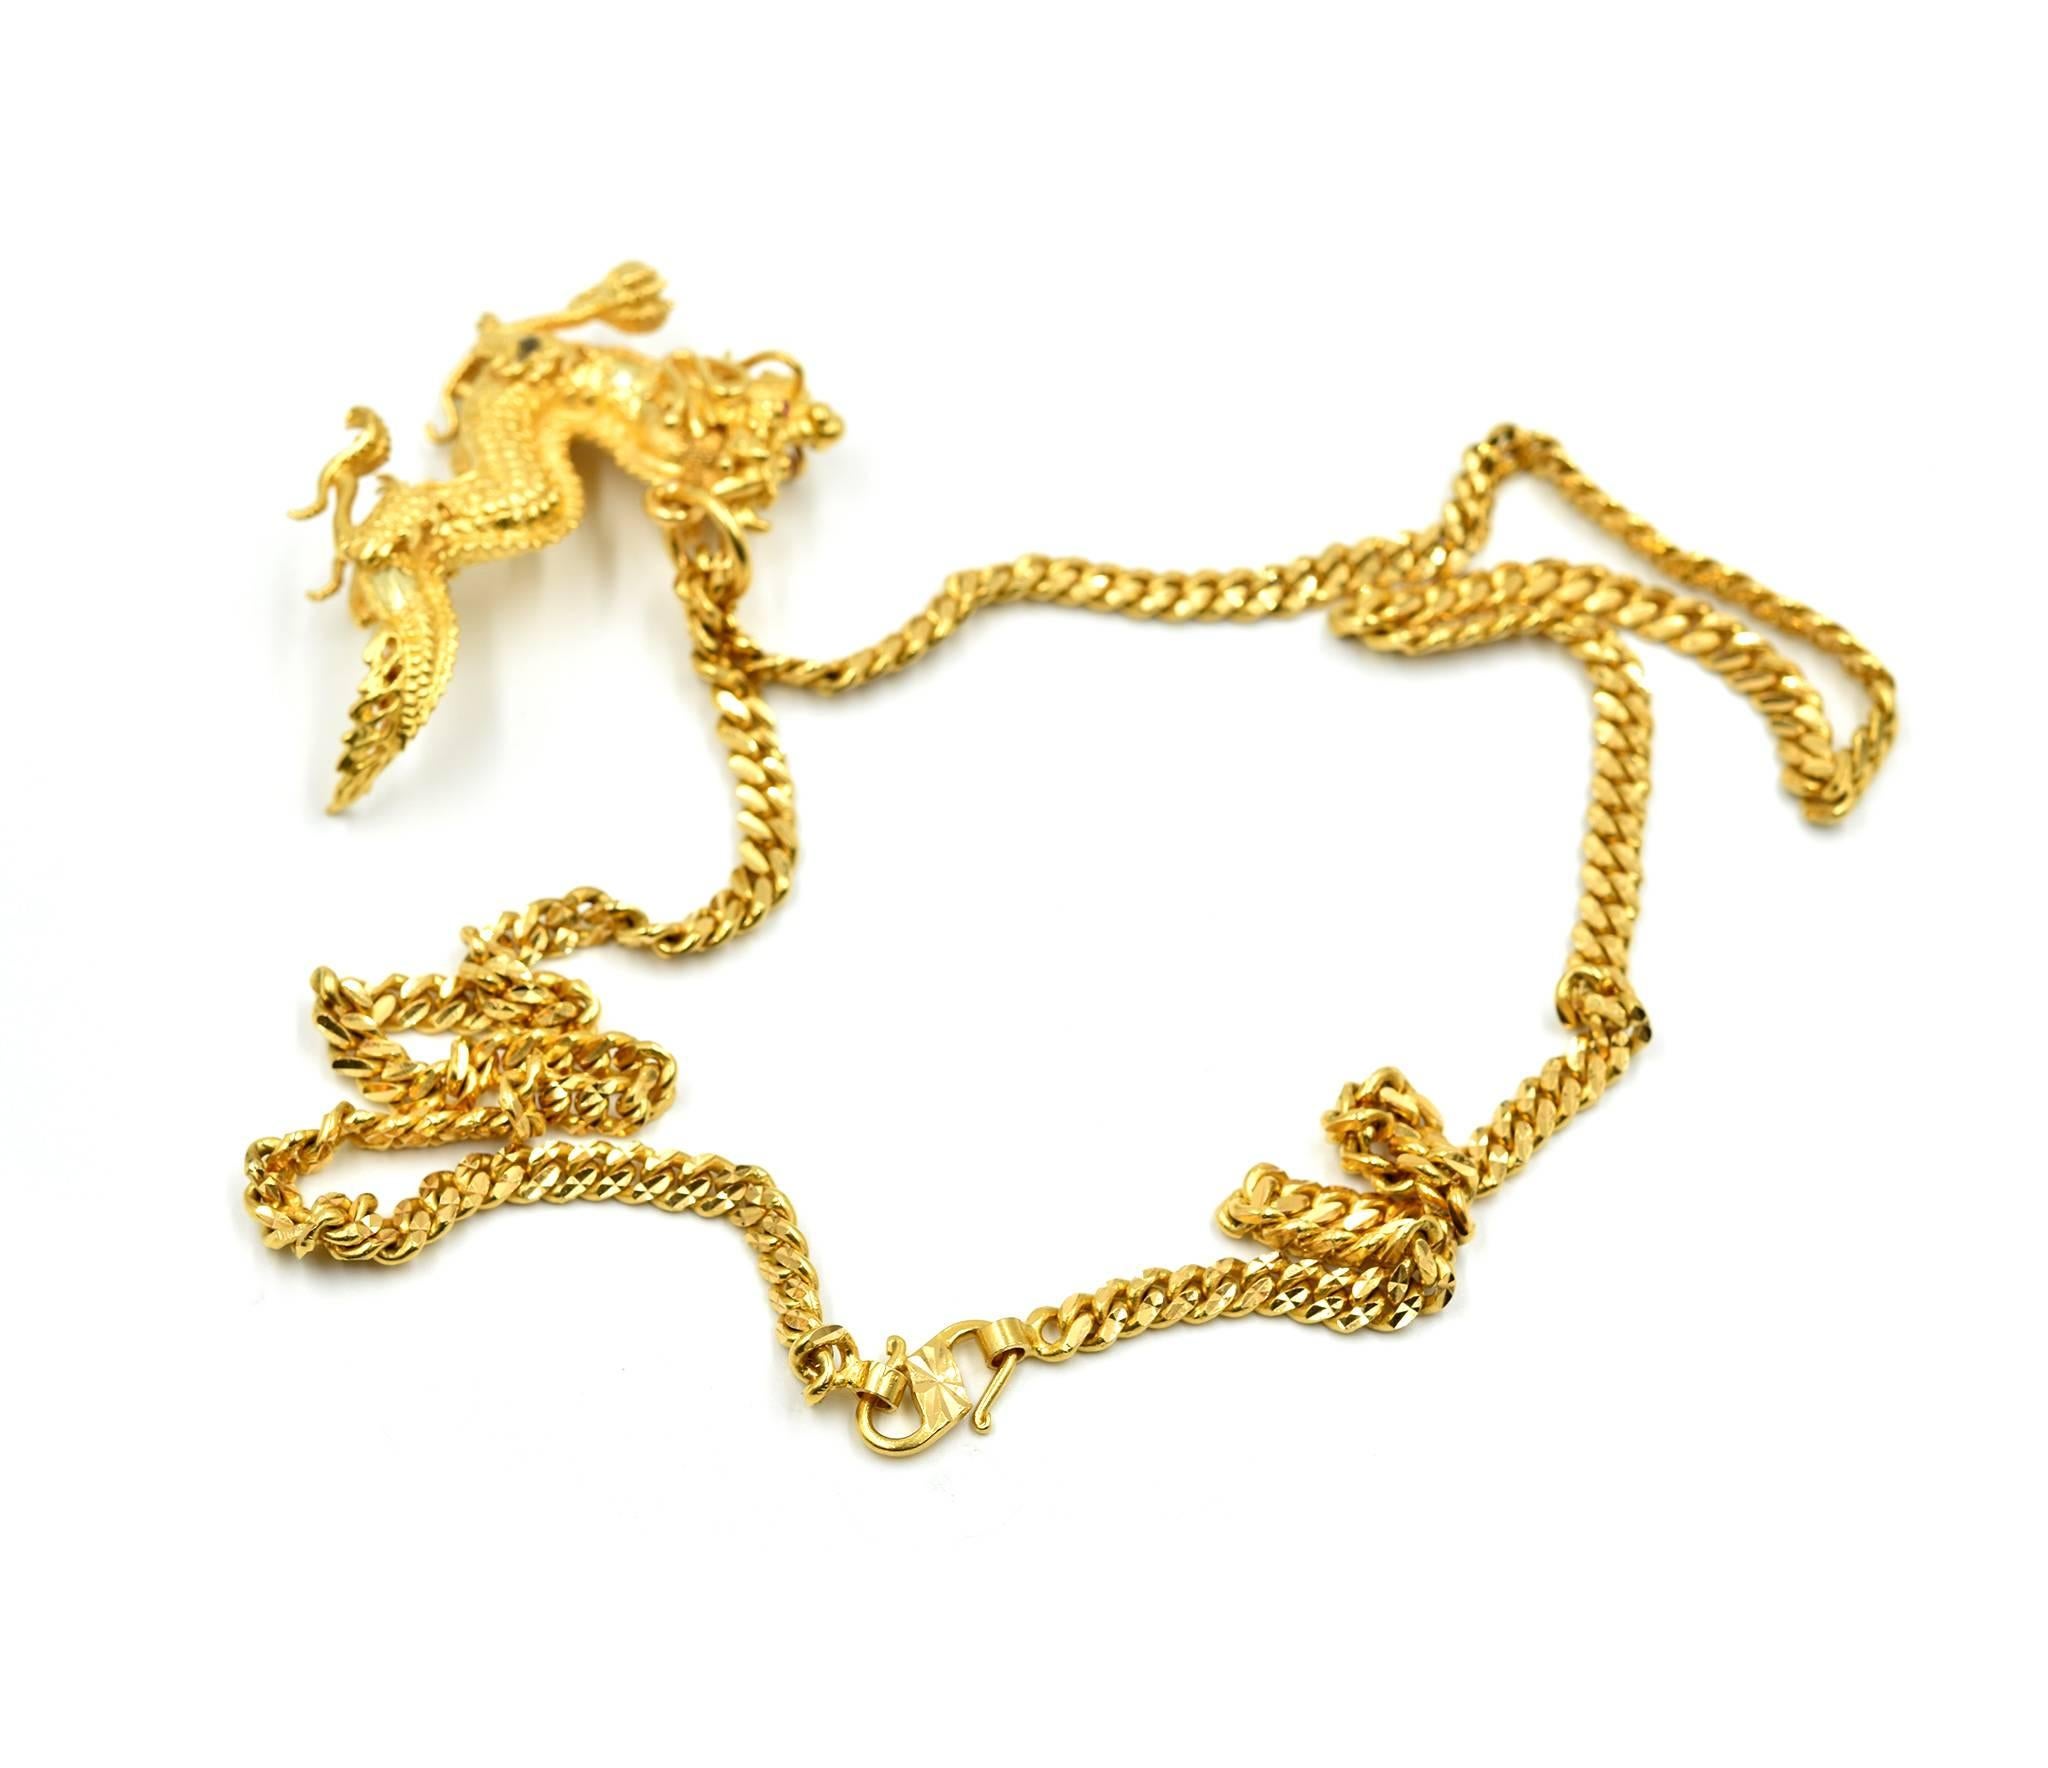 Round Cut Yellow Gold Oriental Ruby Dragon on 22 Karat Yellow Gold Curb Link Necklace